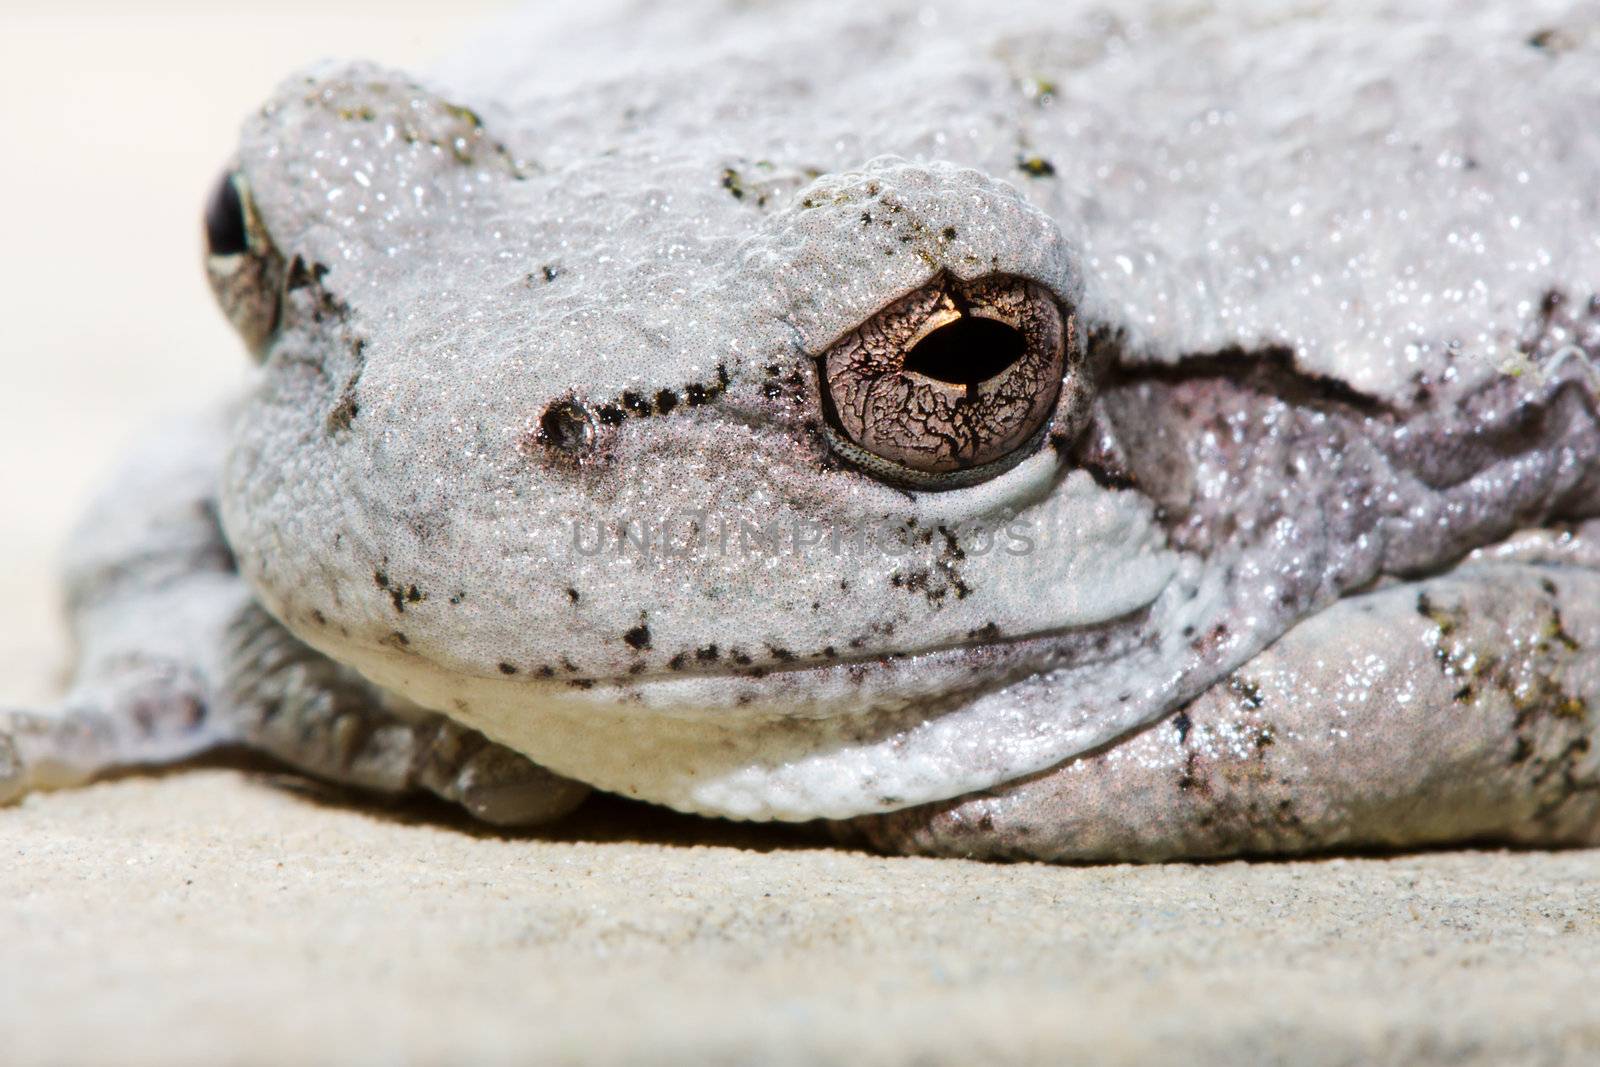 Cope's Gray Tree Frog. by Coffee999